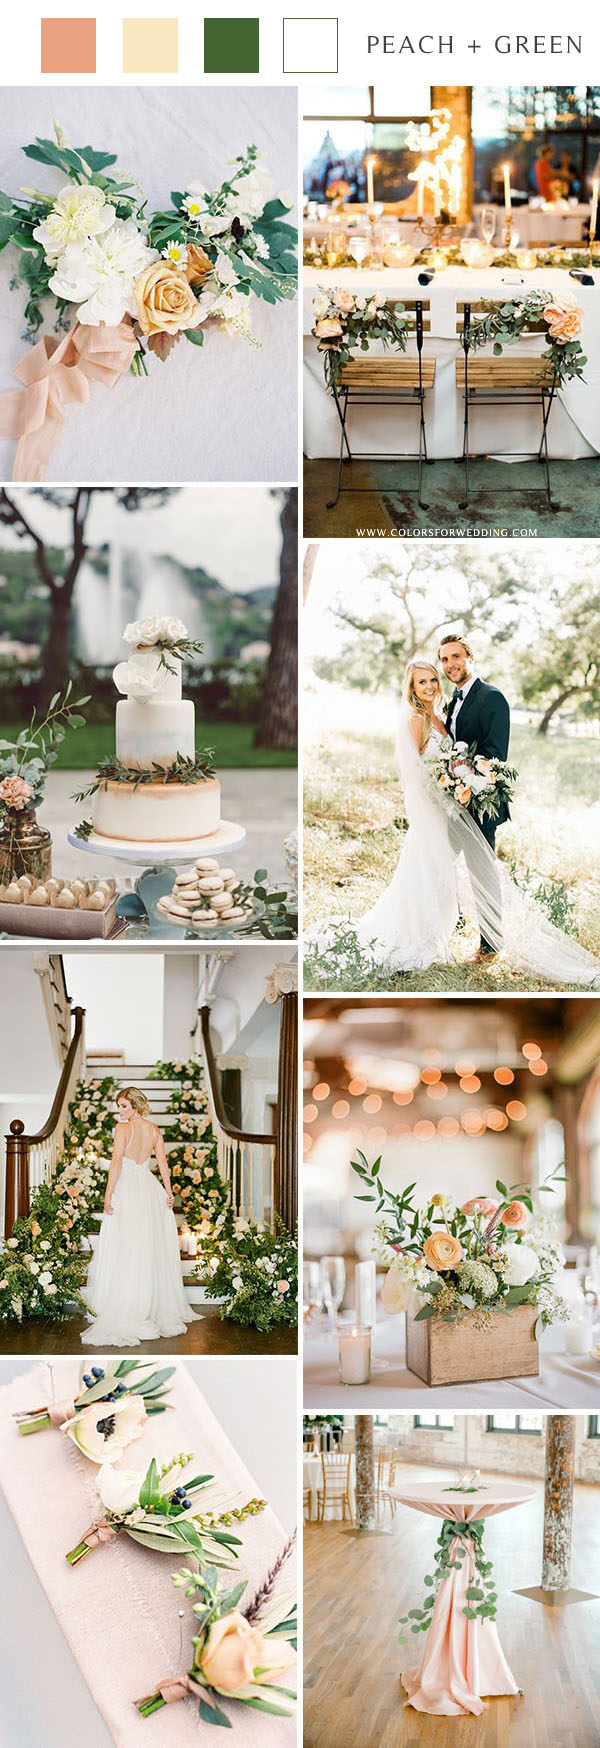 Peach ivory and foliage summer wedding color palette